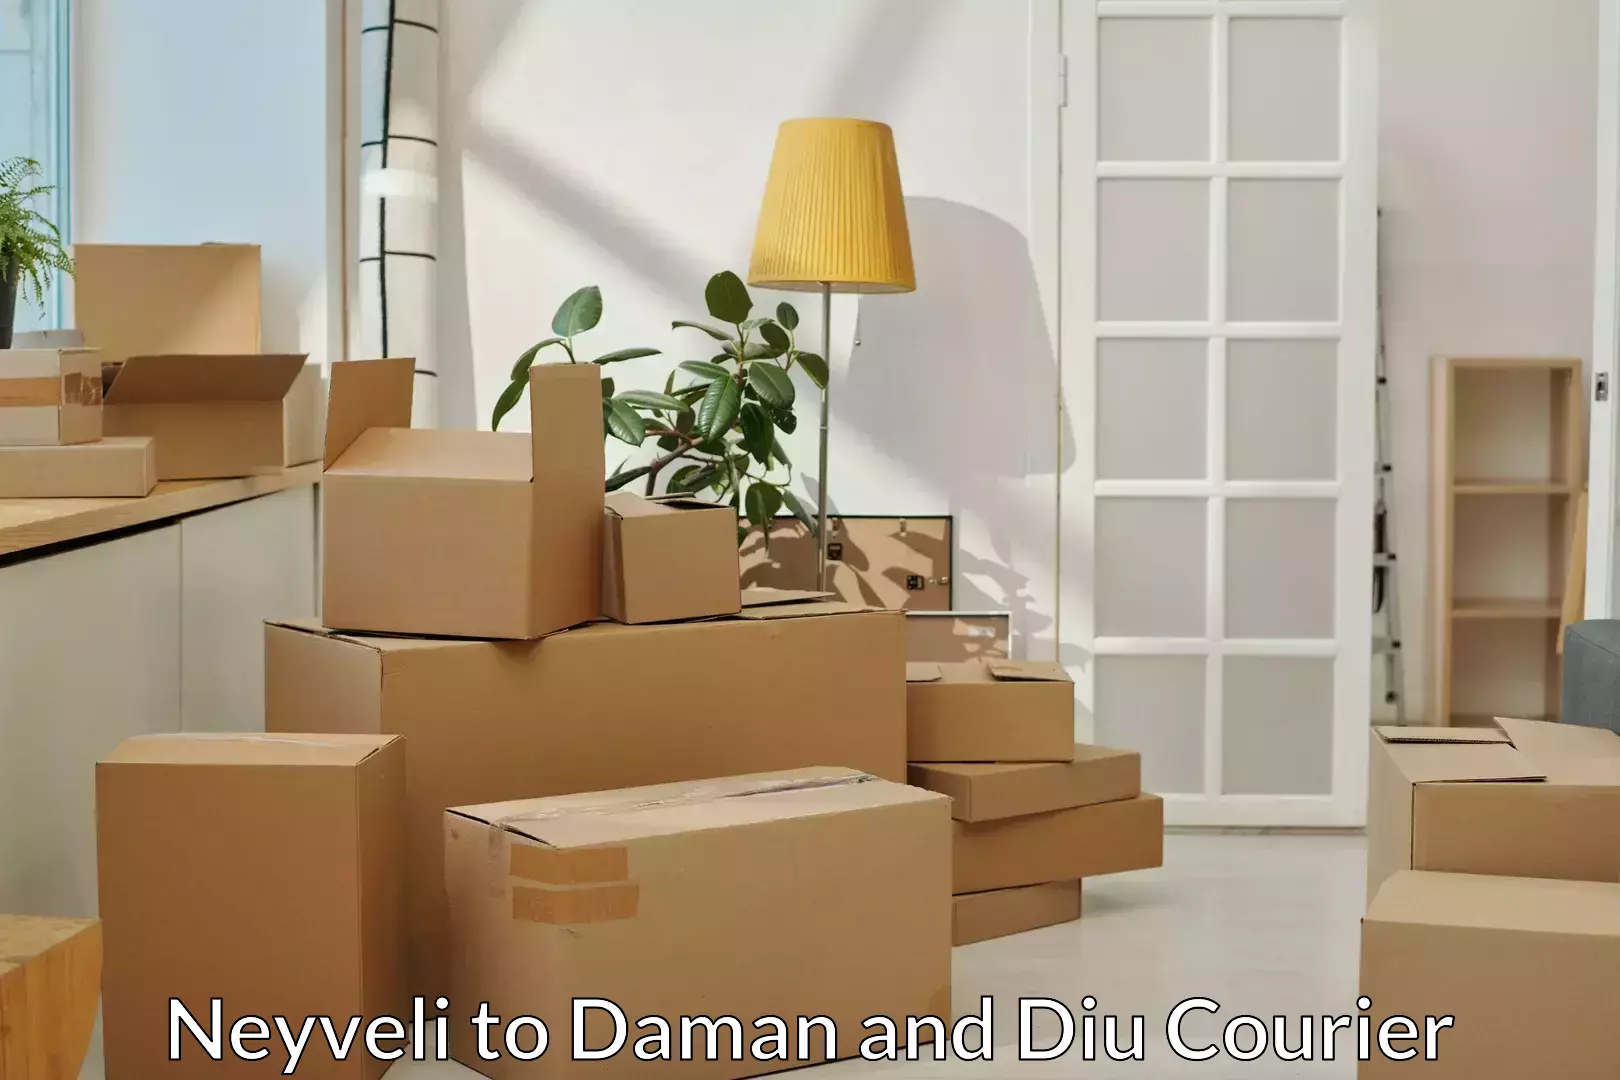 Residential moving experts Neyveli to Diu